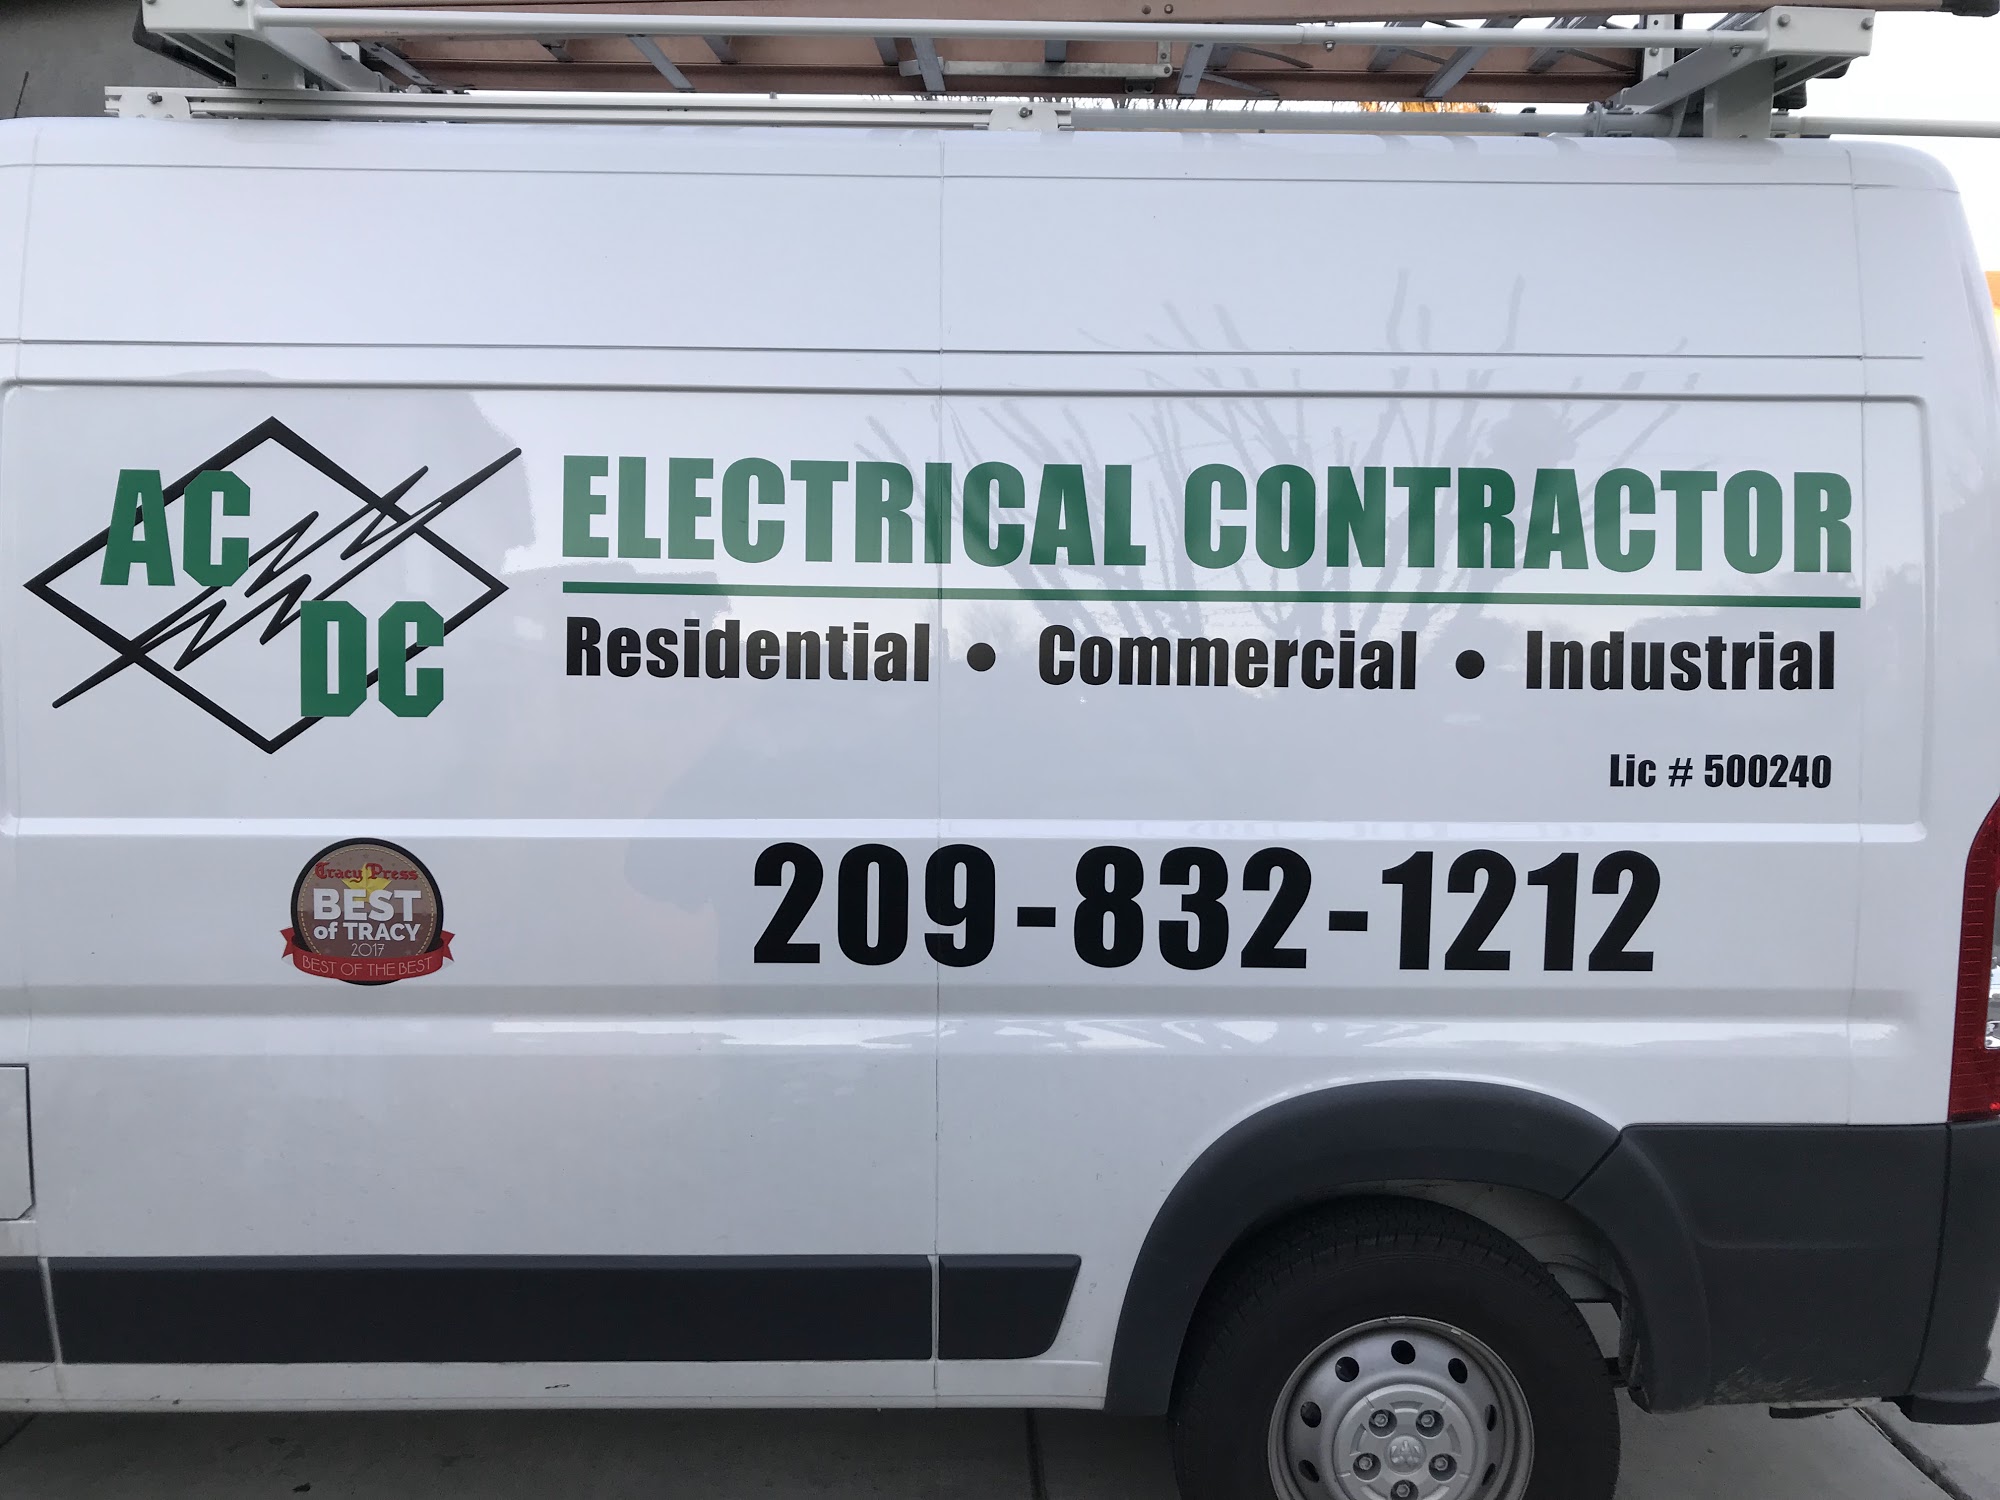 AC/DC Electrical Contractor, INC